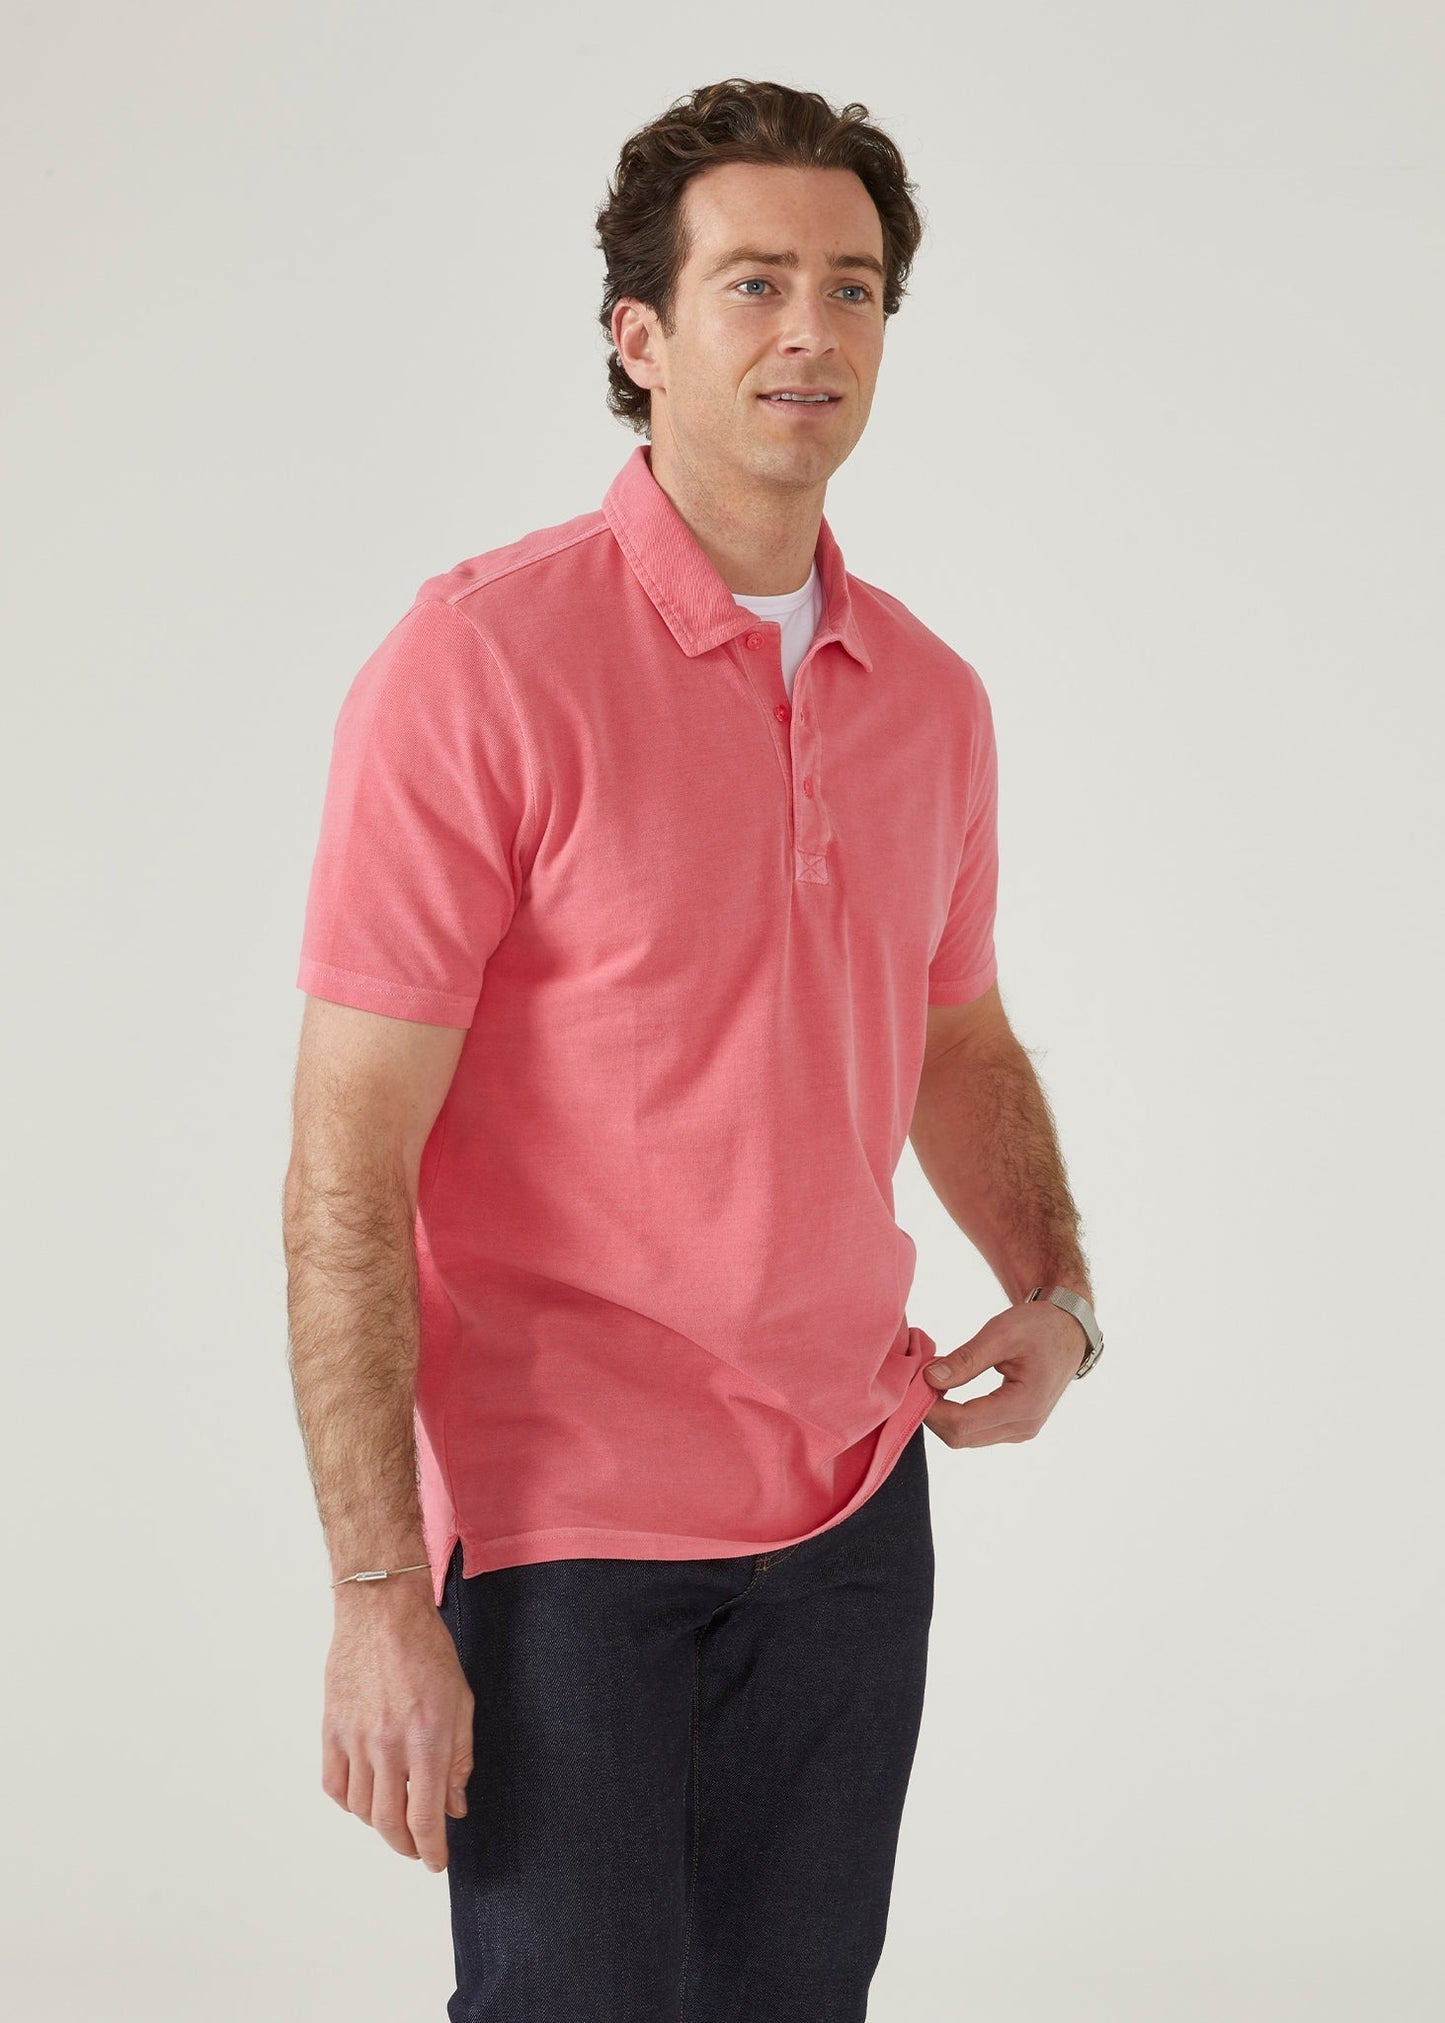 calypso pink polo shirt with short sleeves made from 100% preuvian cotton.